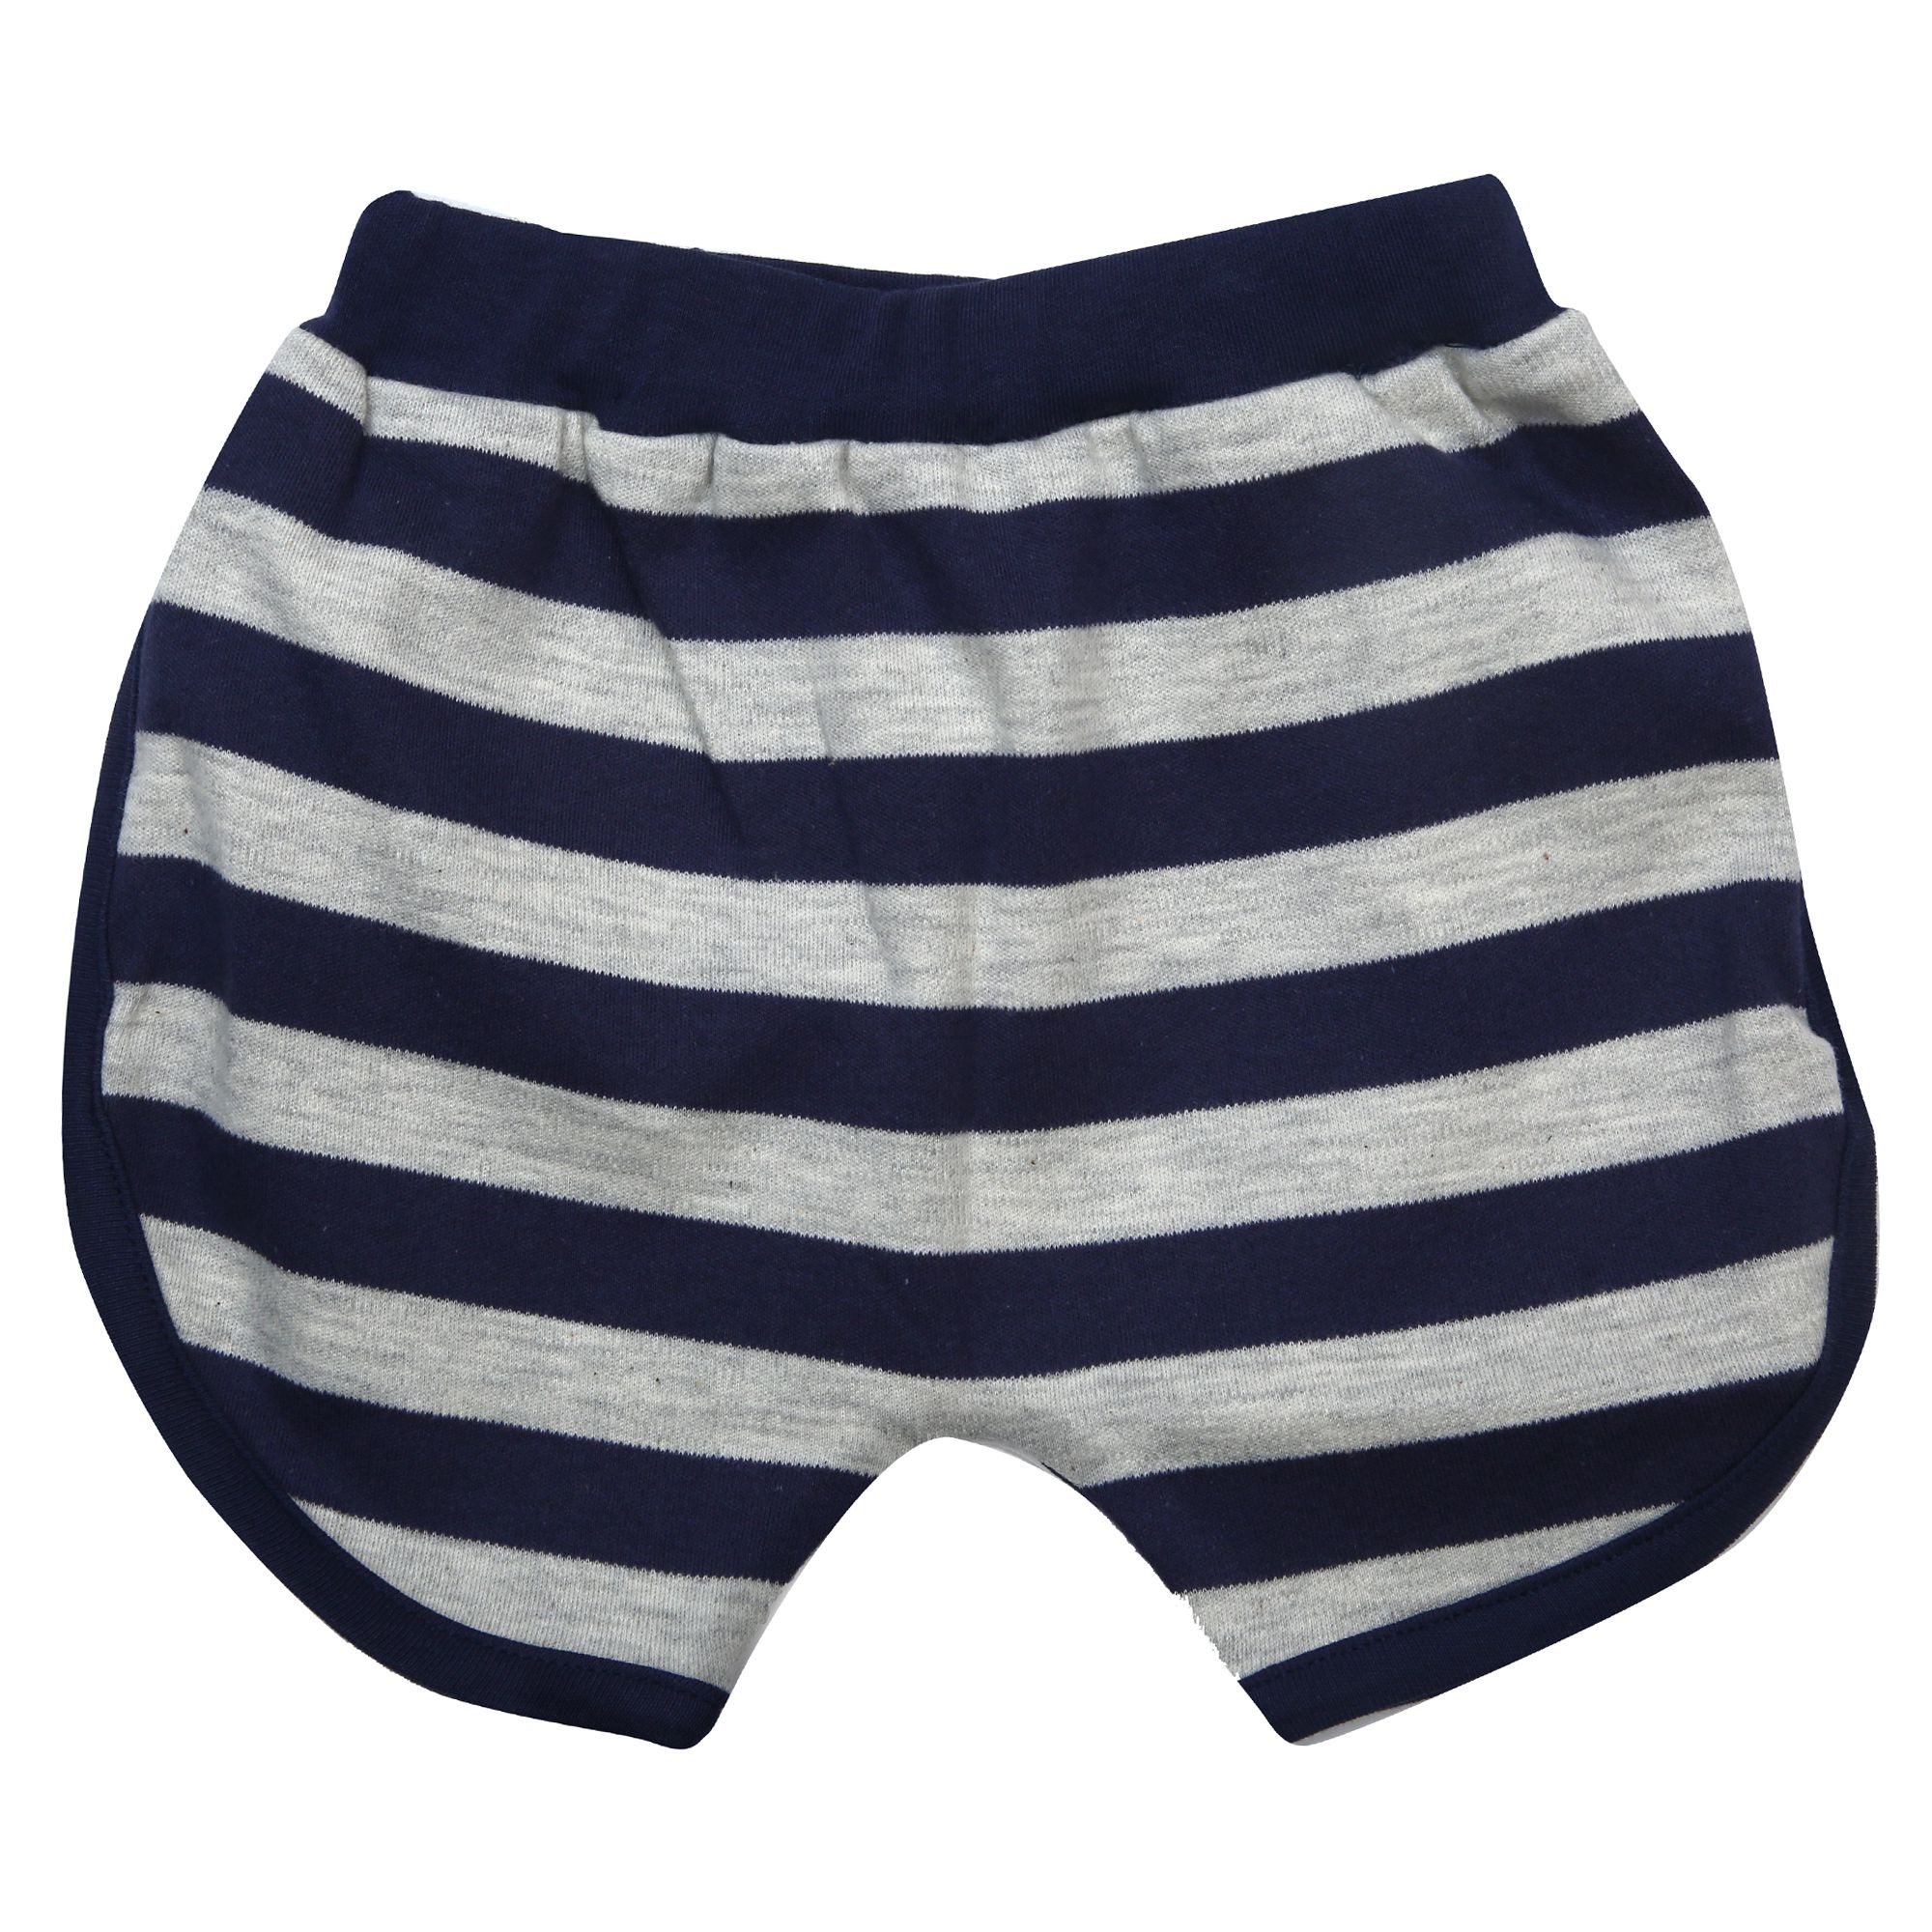     			Kaboos Cotton Navy Blue Coloured Striped Short/ Pant For Baby